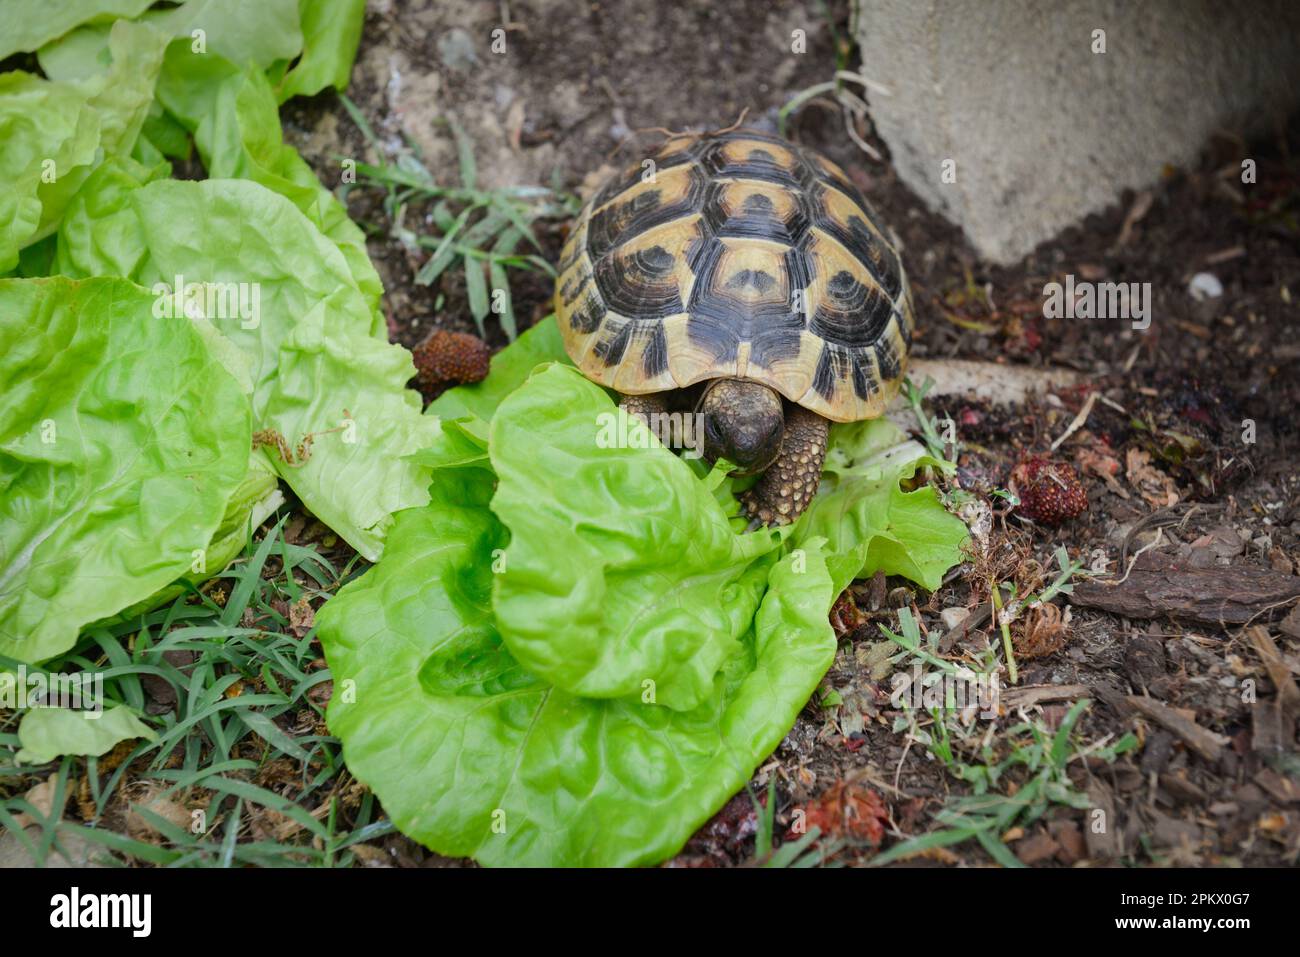 A land turtle eats a green salad leaf that is larger than its size Stock Photo